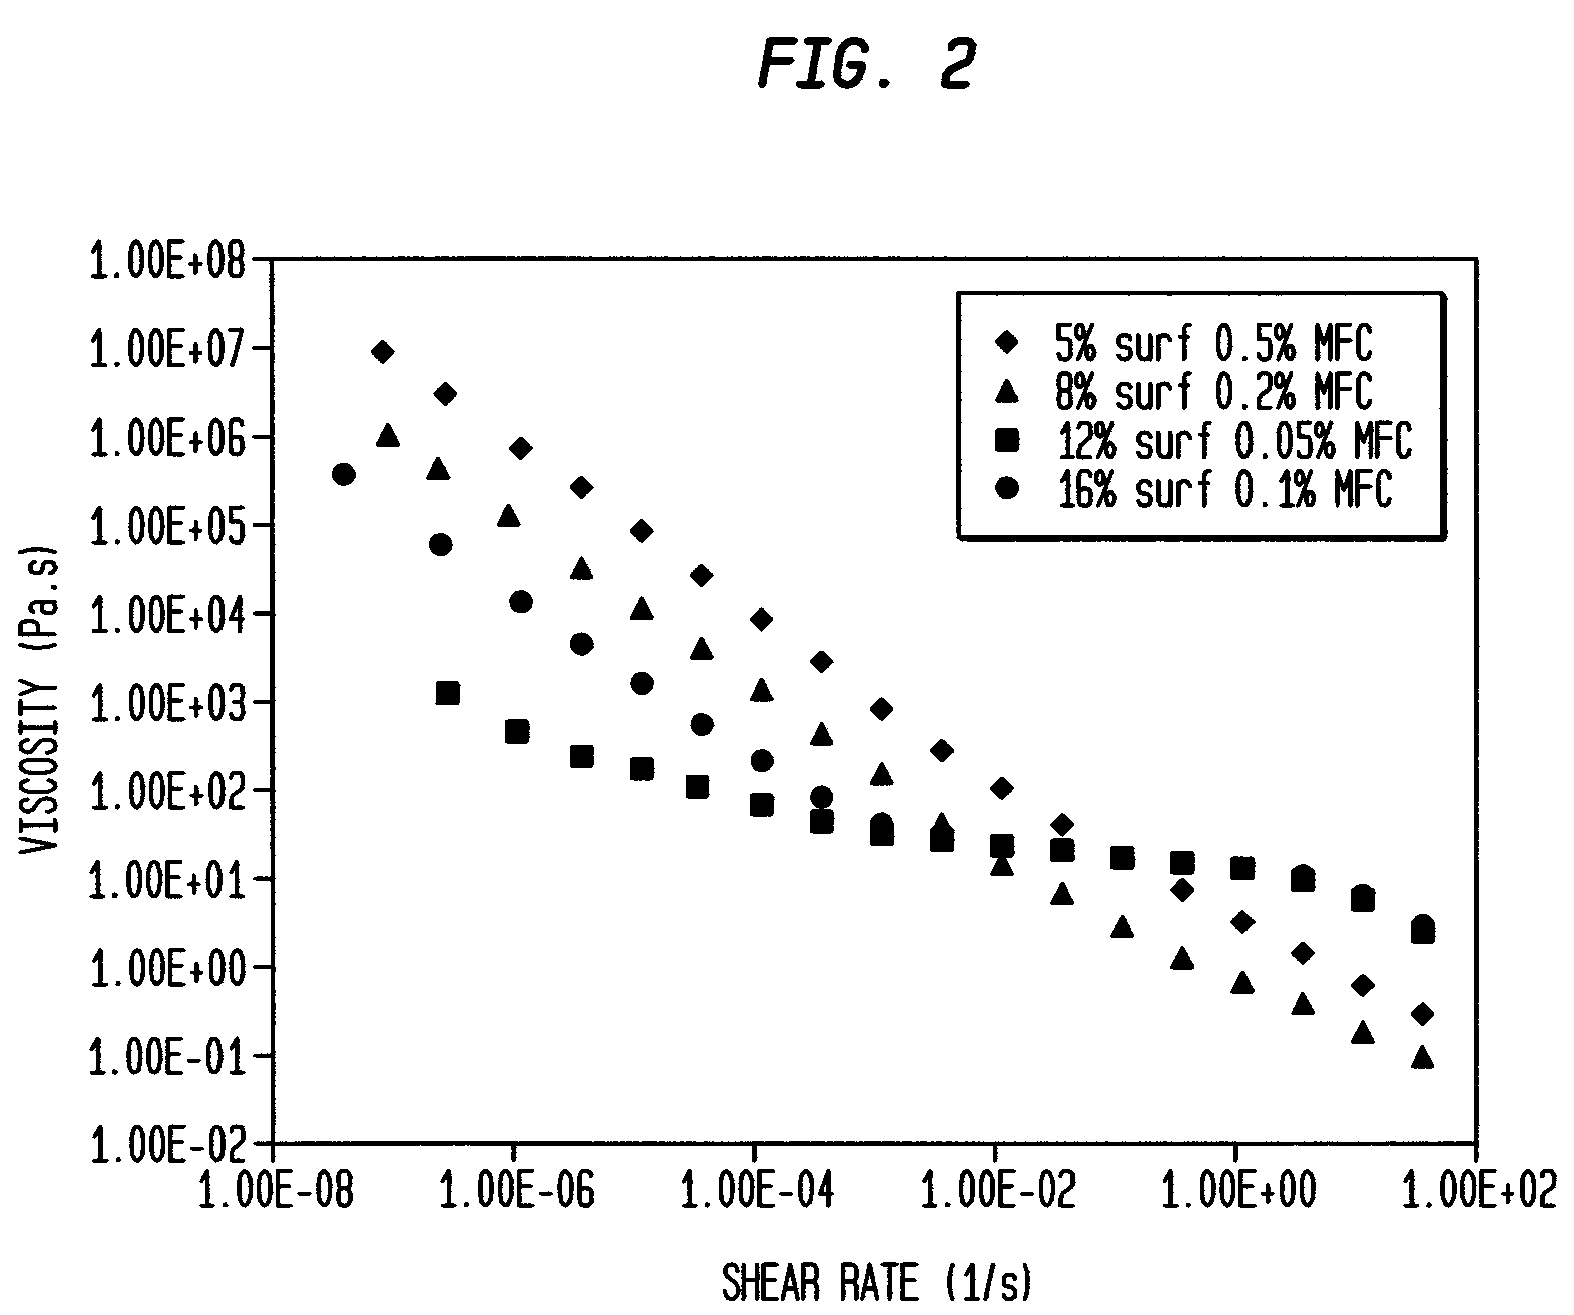 Liquid cleansing compositions comprising microfibrous cellulose suspending polymers